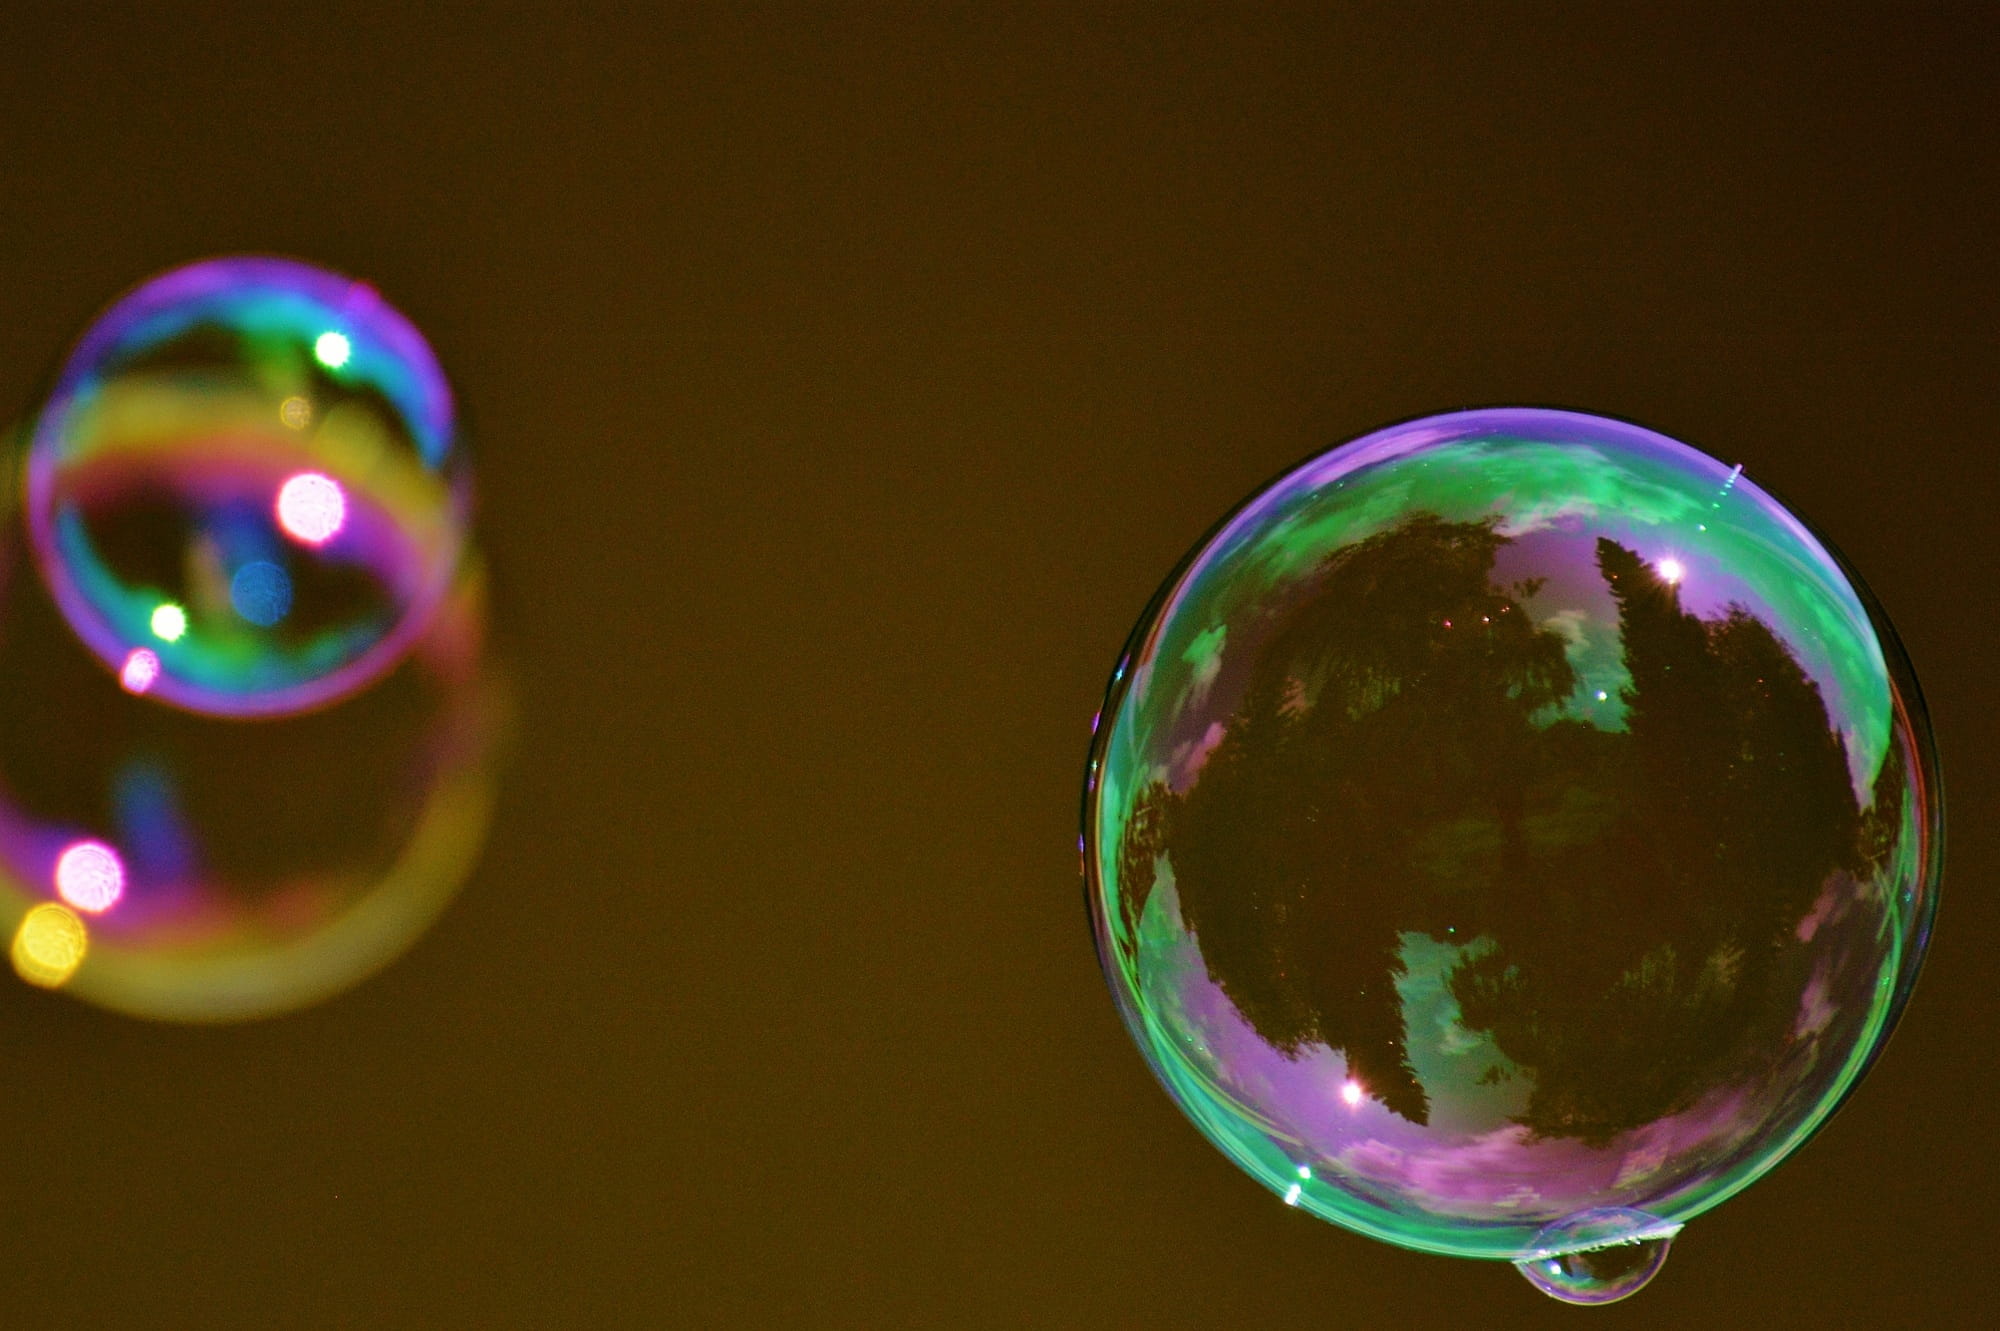 macro photography of bubbles, soap bubble, colorful, ball, soapy water